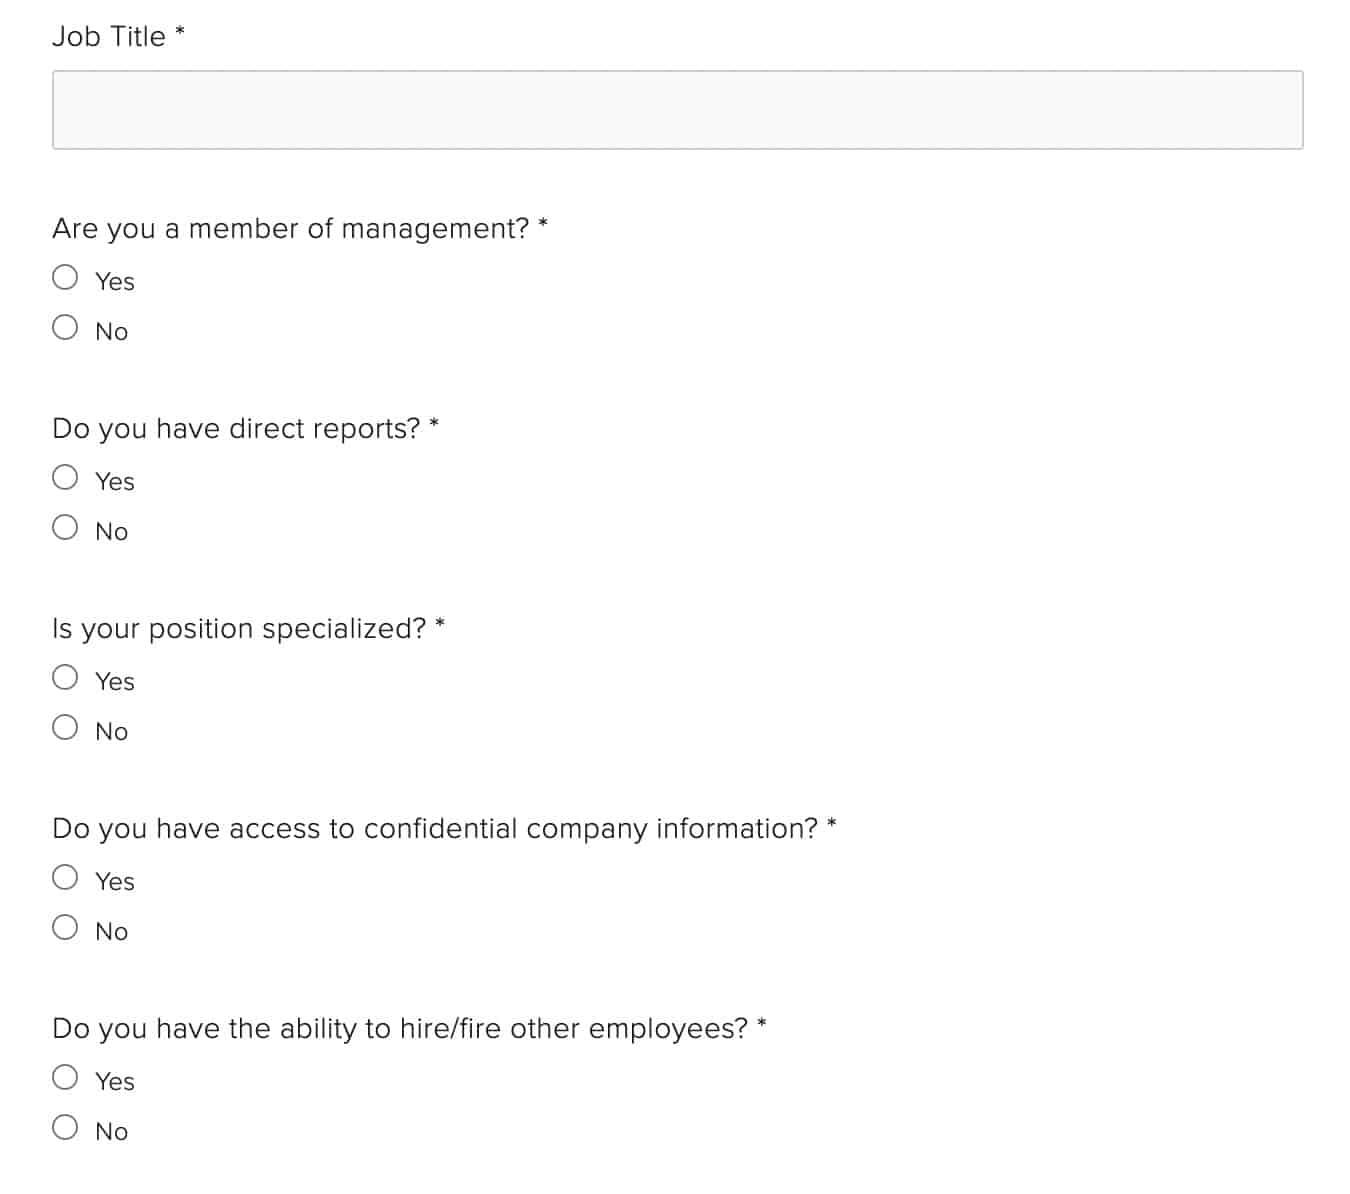 client intake form example, law firm